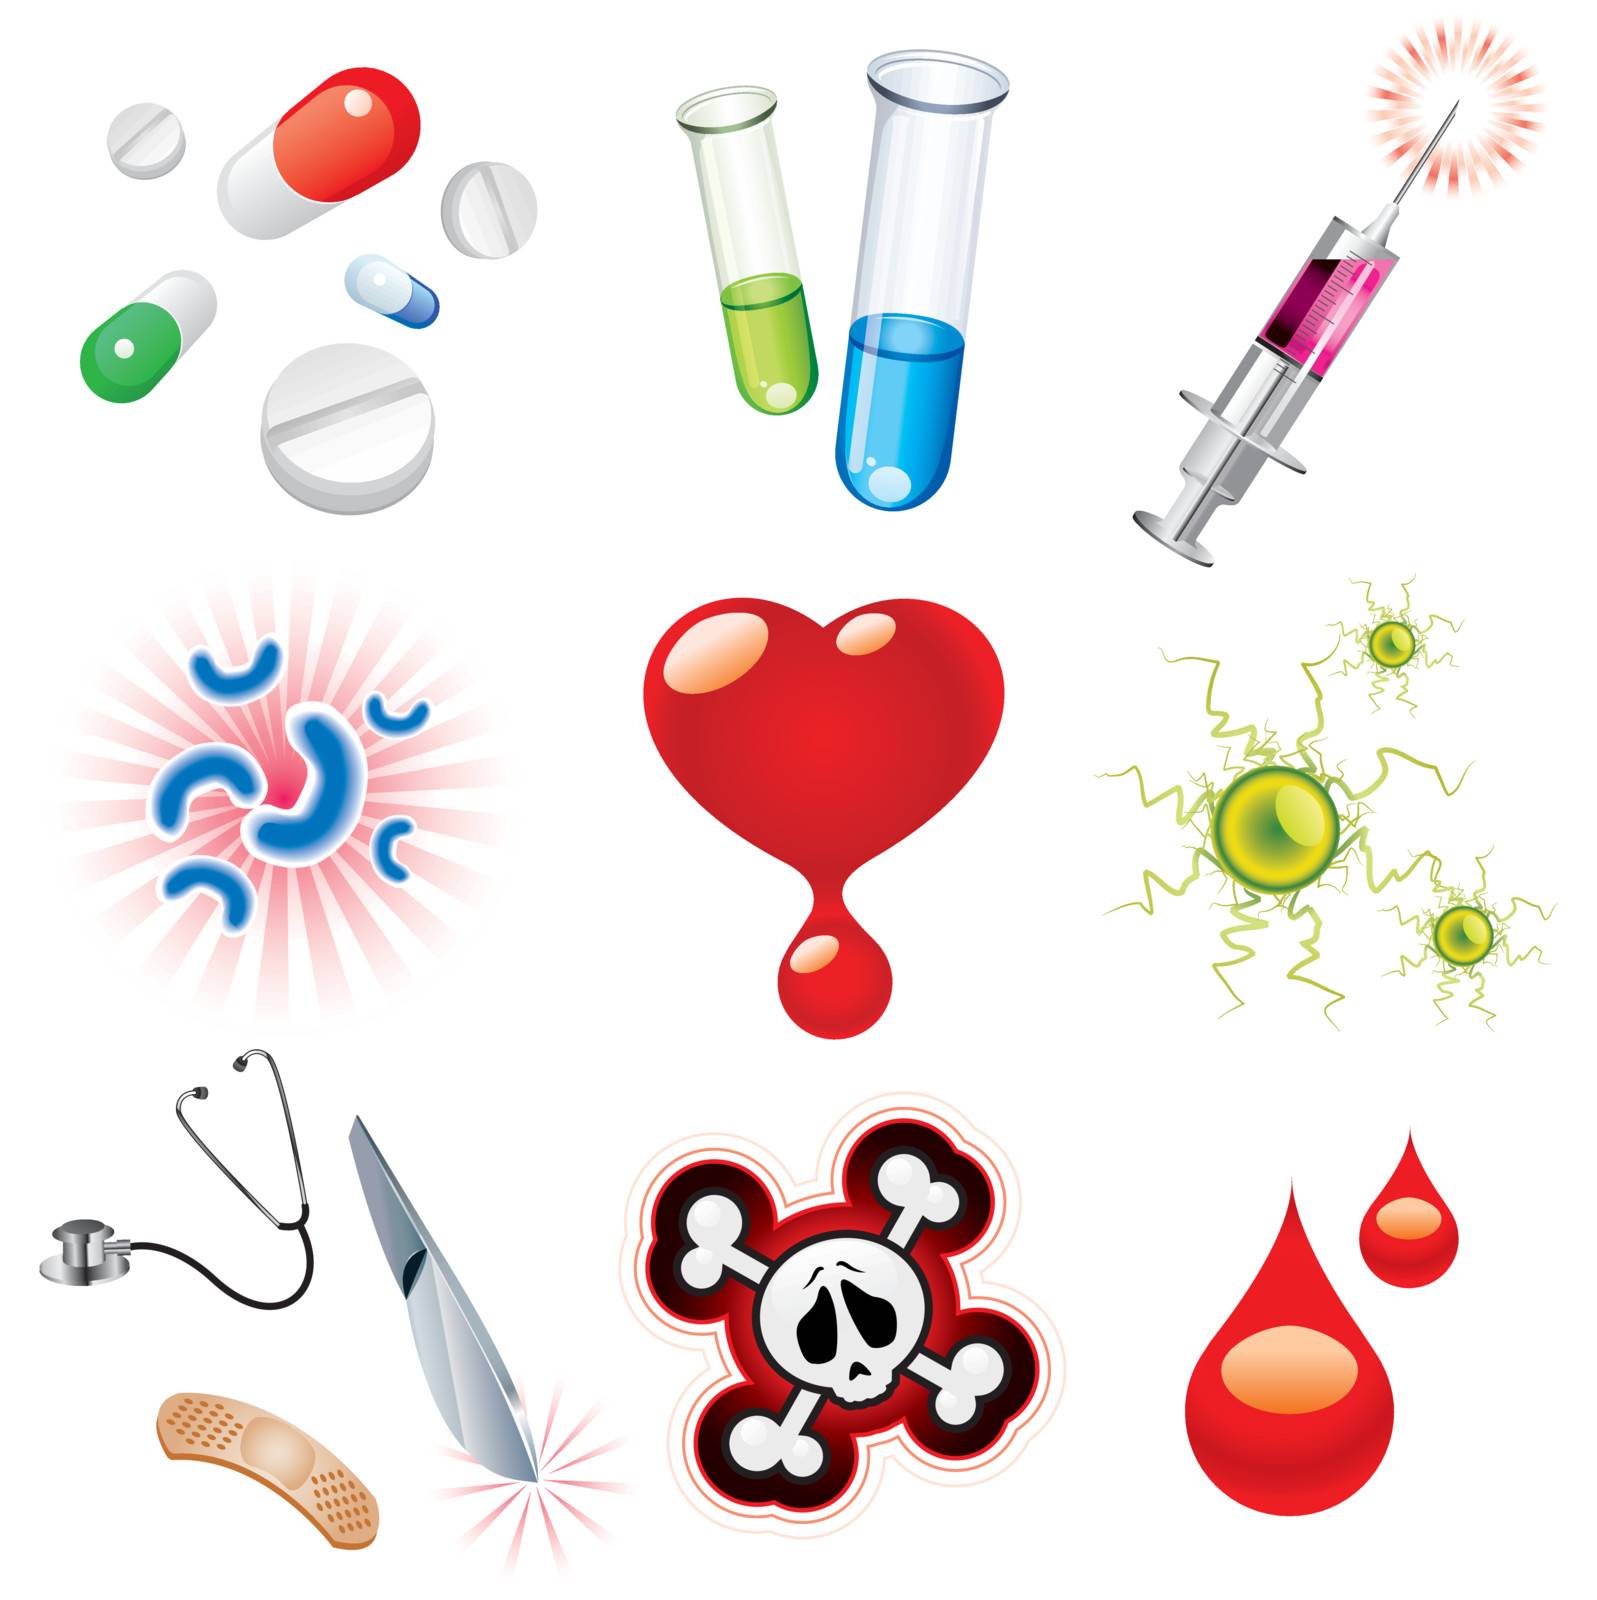 Set of icons which contains medical items